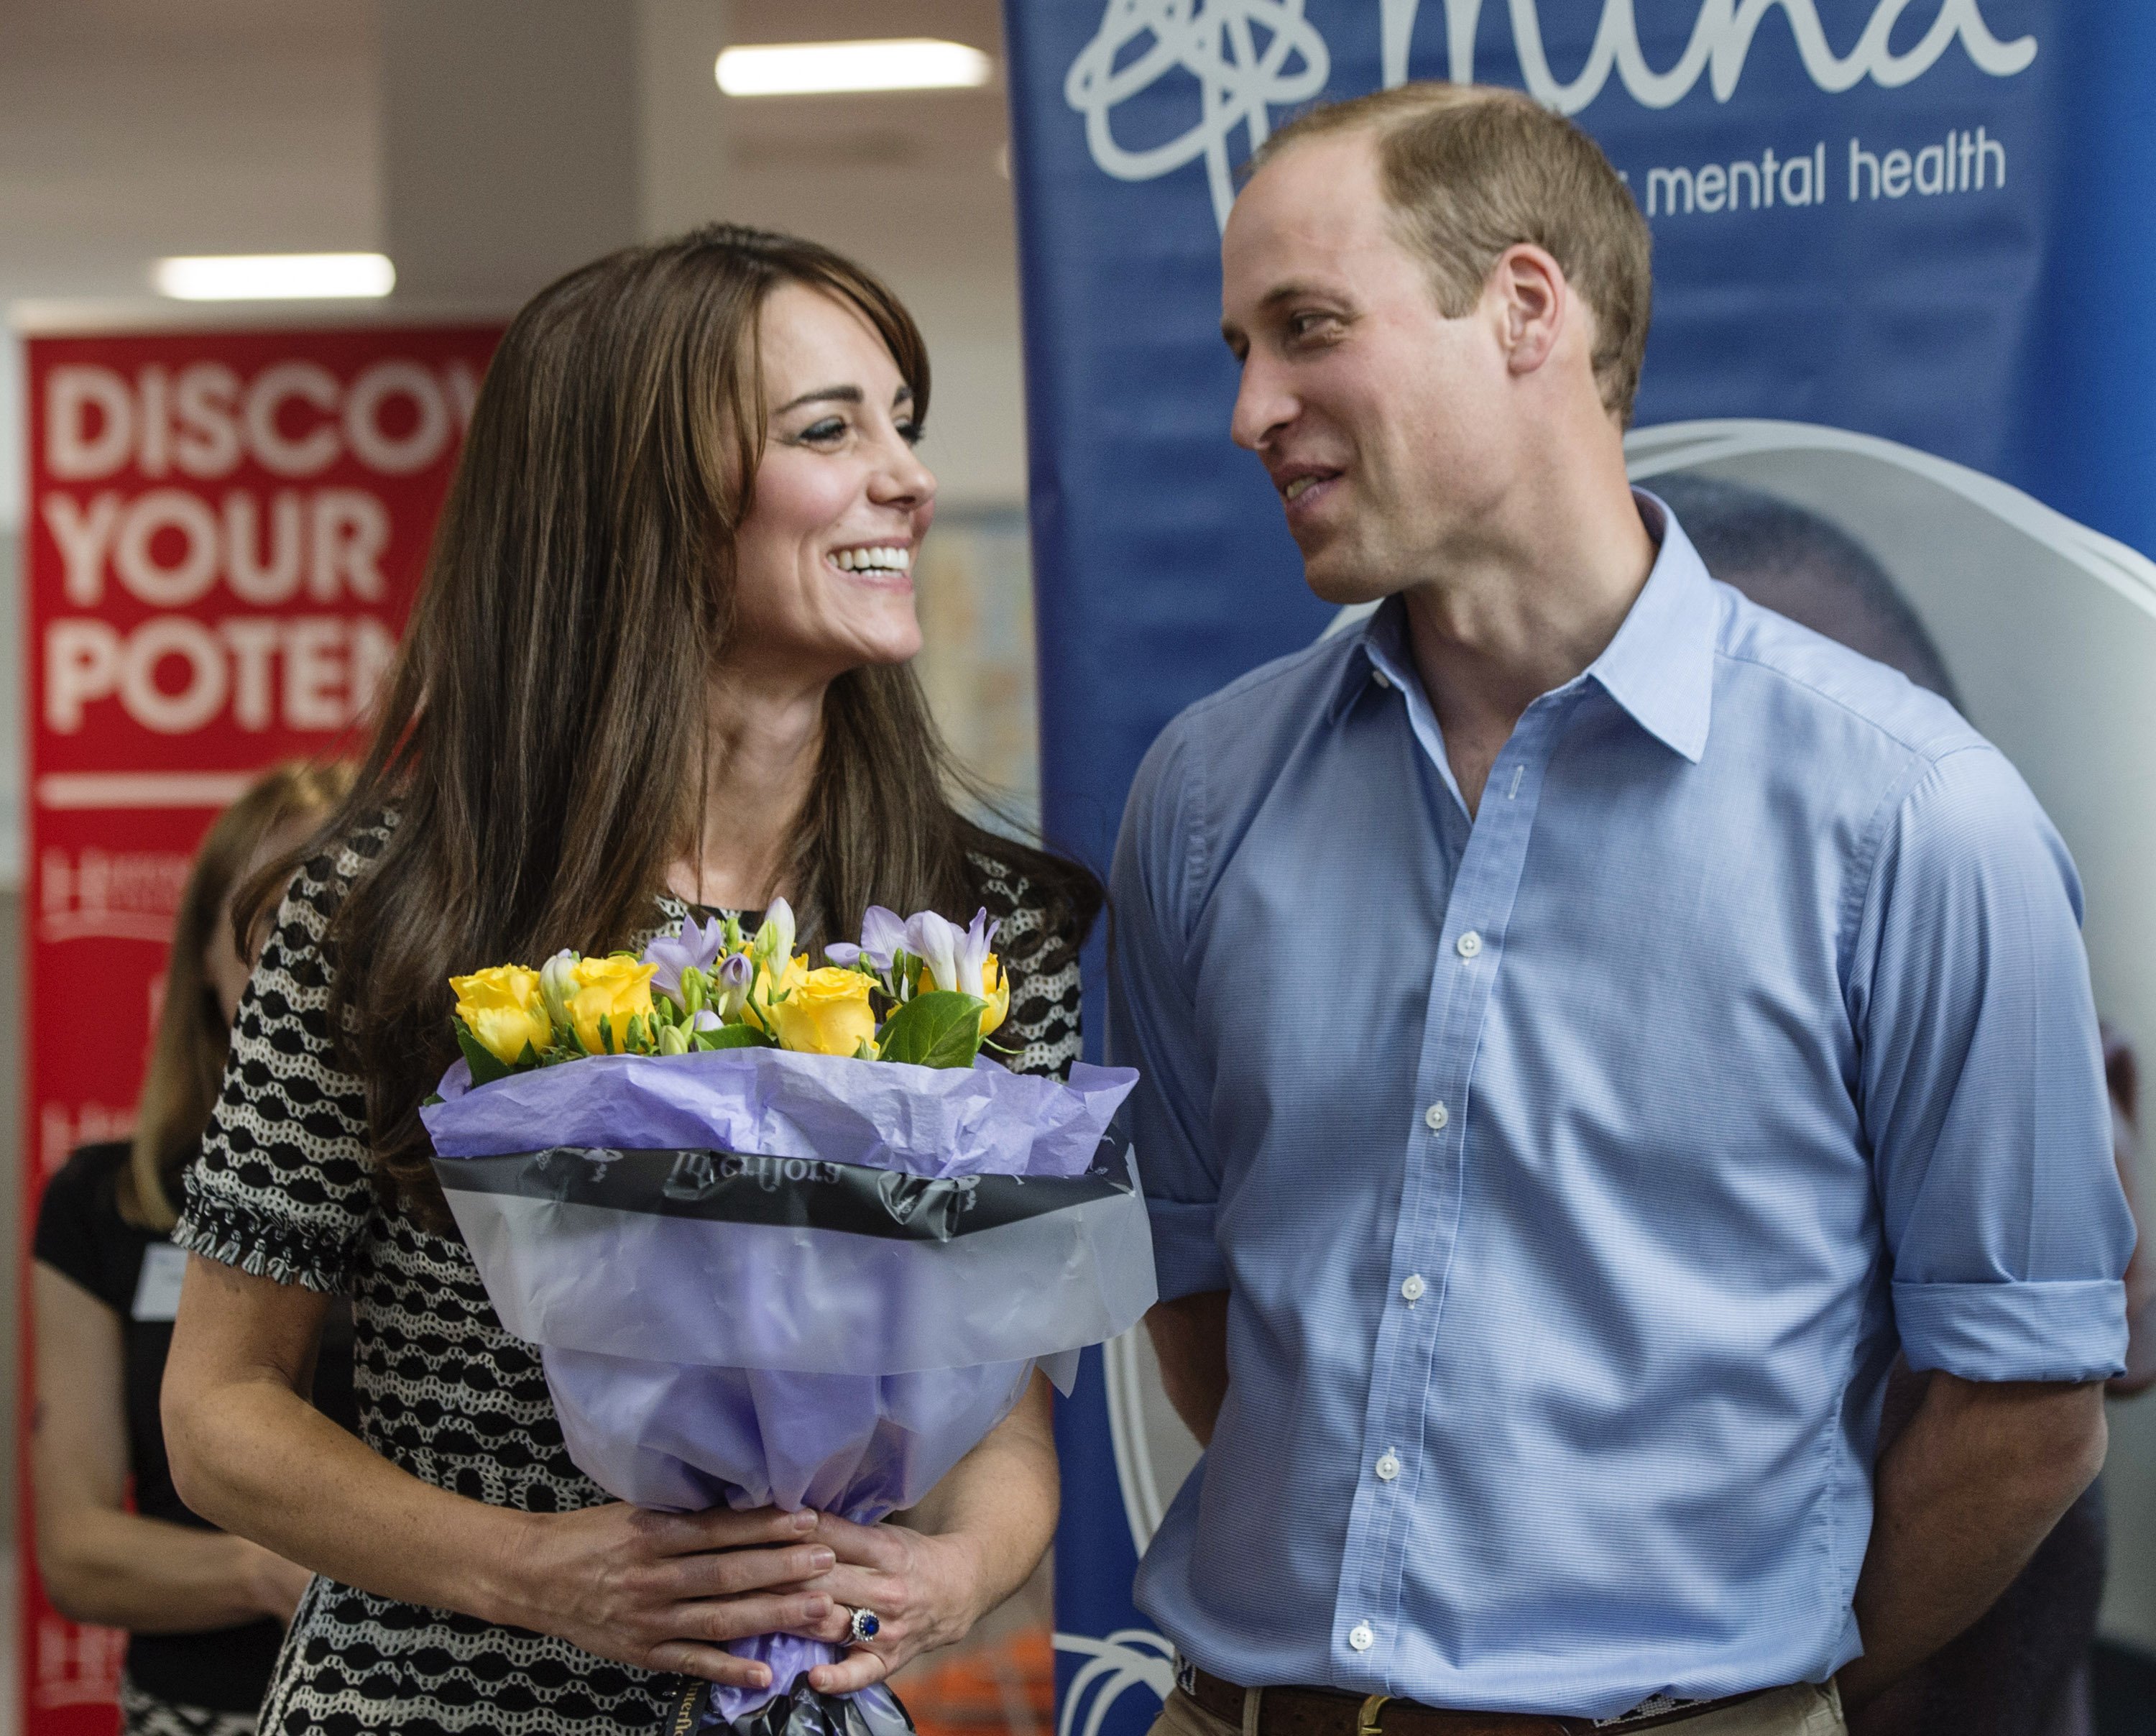 Duke of Cambridge and Catherine, and Duchess of Cambridge attend an event hosted by Mind, at Harrow College | Source: Getty Images